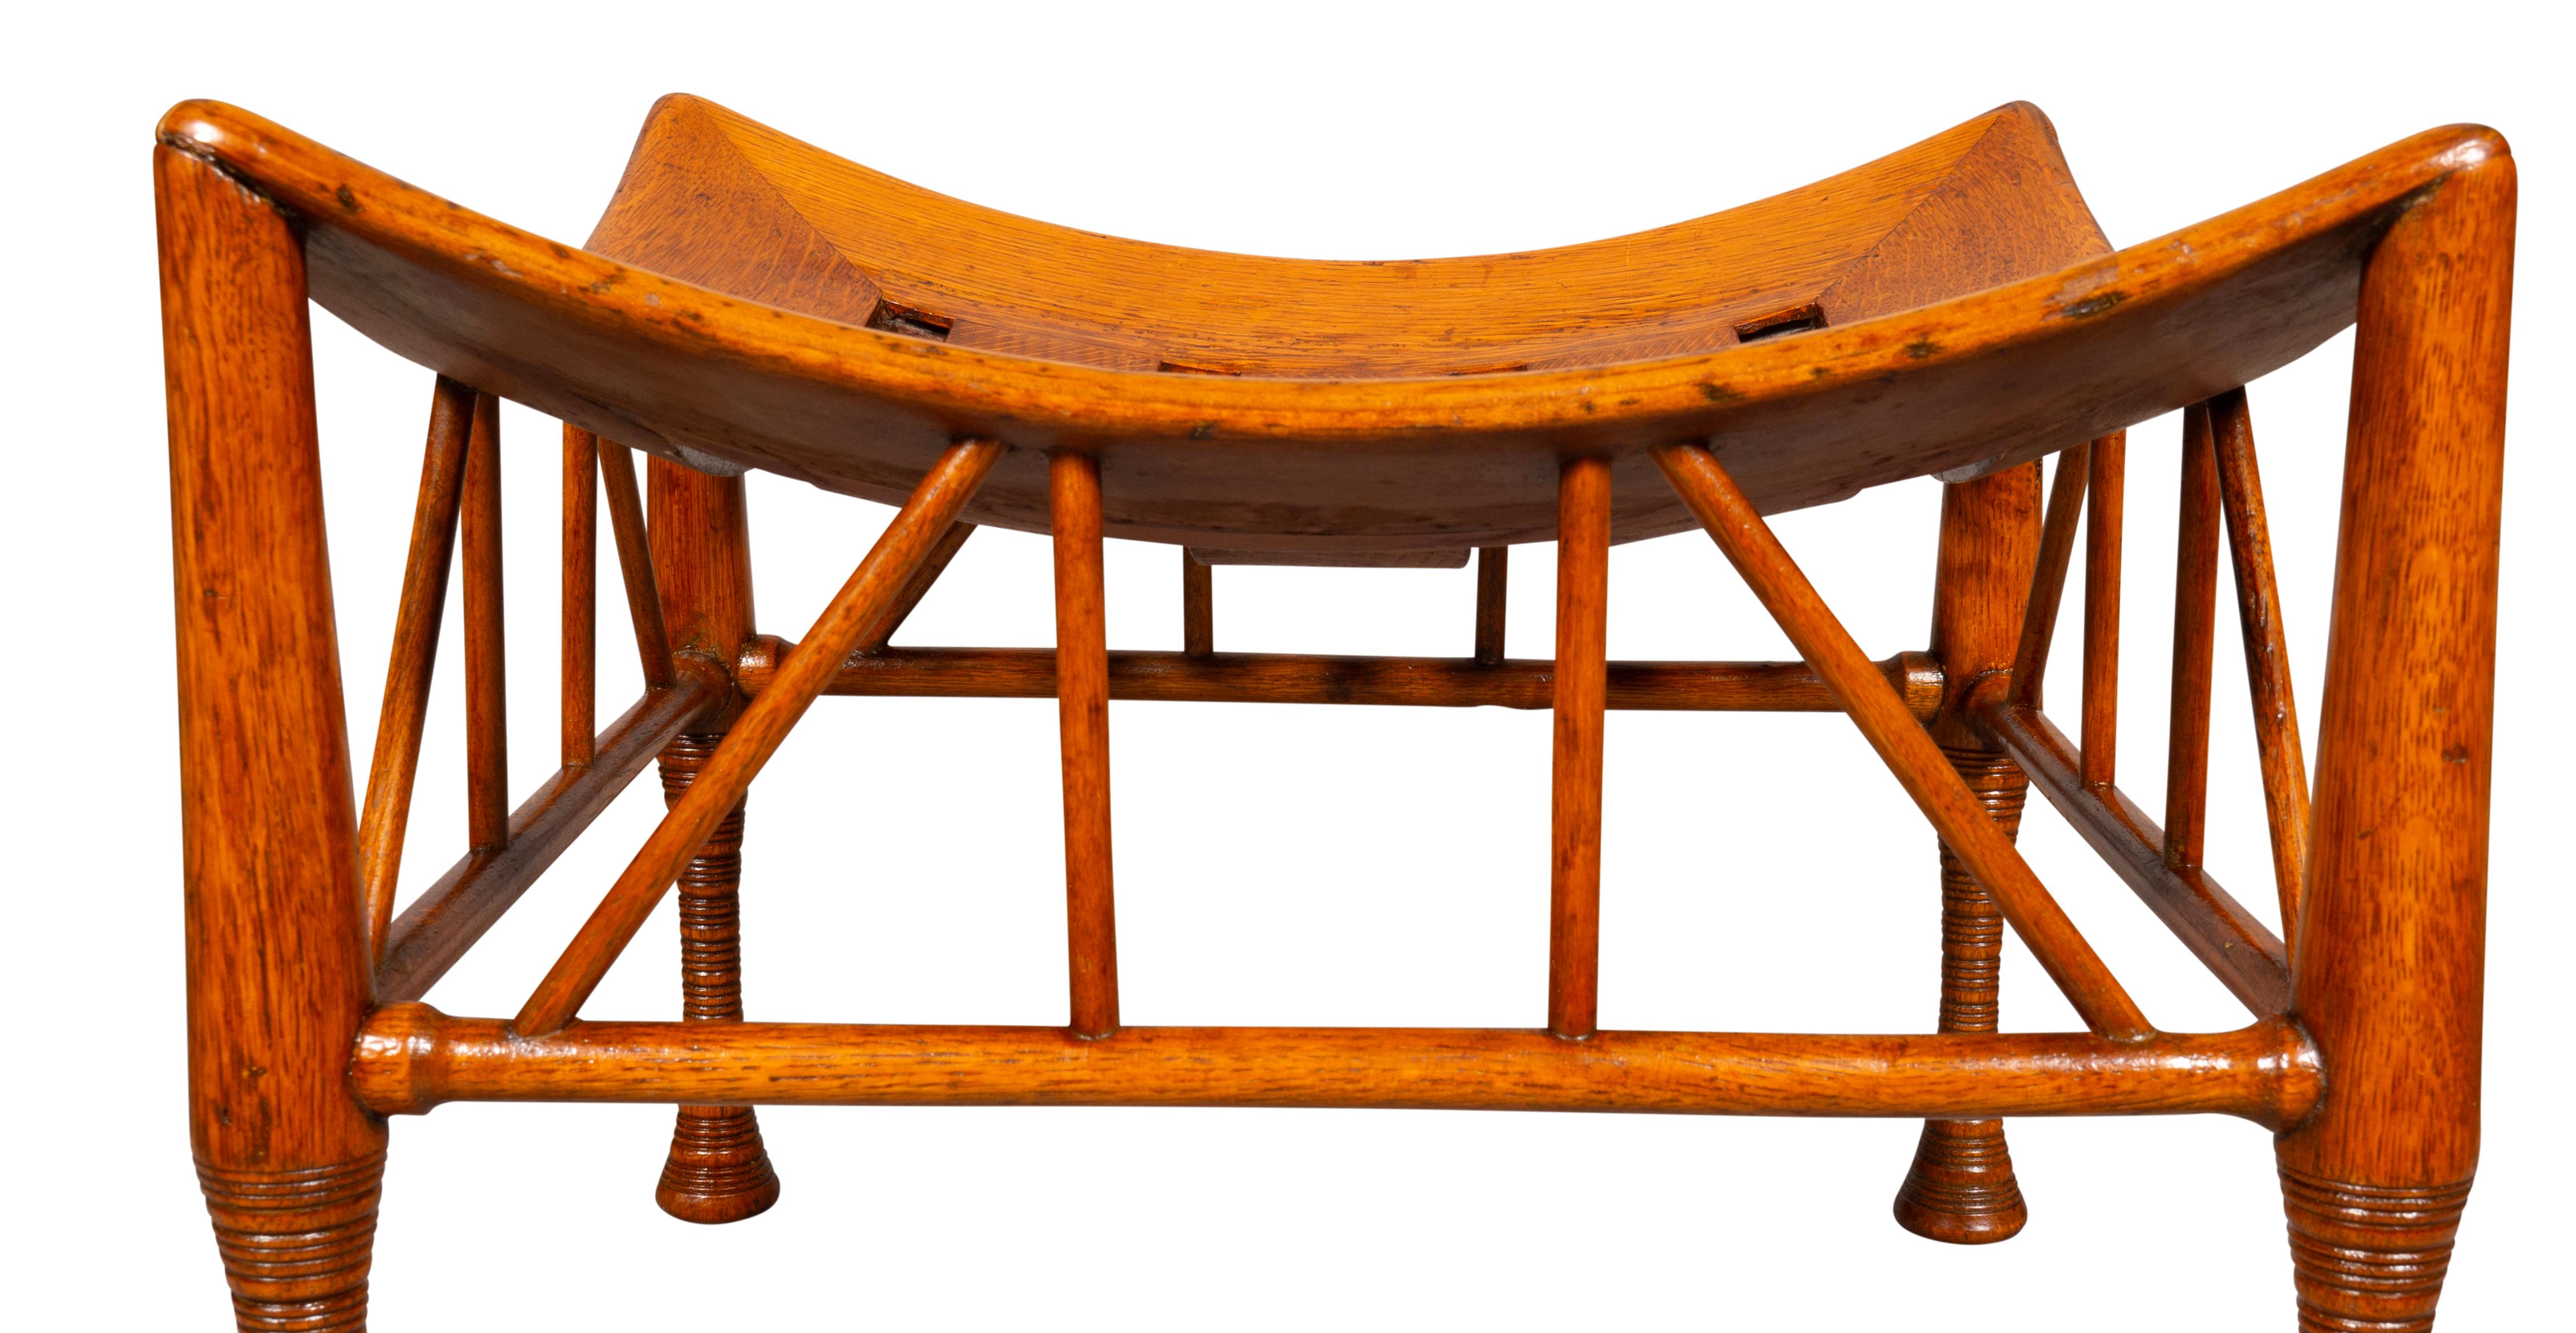 Late 19th Century American Aesthetic Oak Thebes Stool For Sale